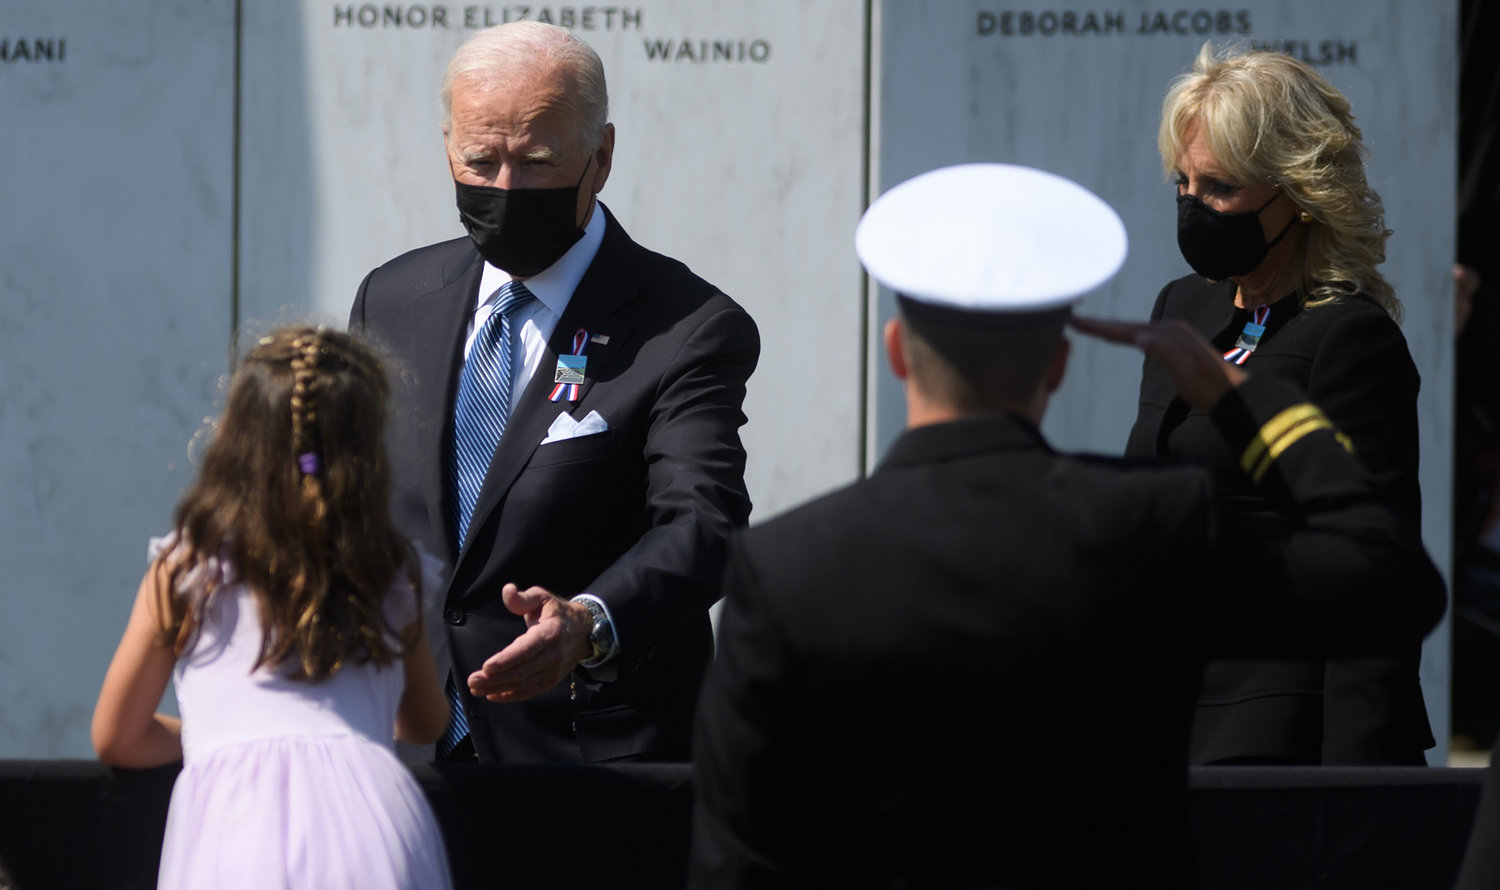 President Joseph Biden and his wife, first lady Jill Biden, attend a wreath-laying ceremony at the 20th Anniversary remembrance of the September 11, 2001, terrorist attacks at the Flight 93 National Memorial on Saturday, Sept. 11, 2021, in Shanksville, Pa. (Jeff Swensen/Getty Images/TNS)